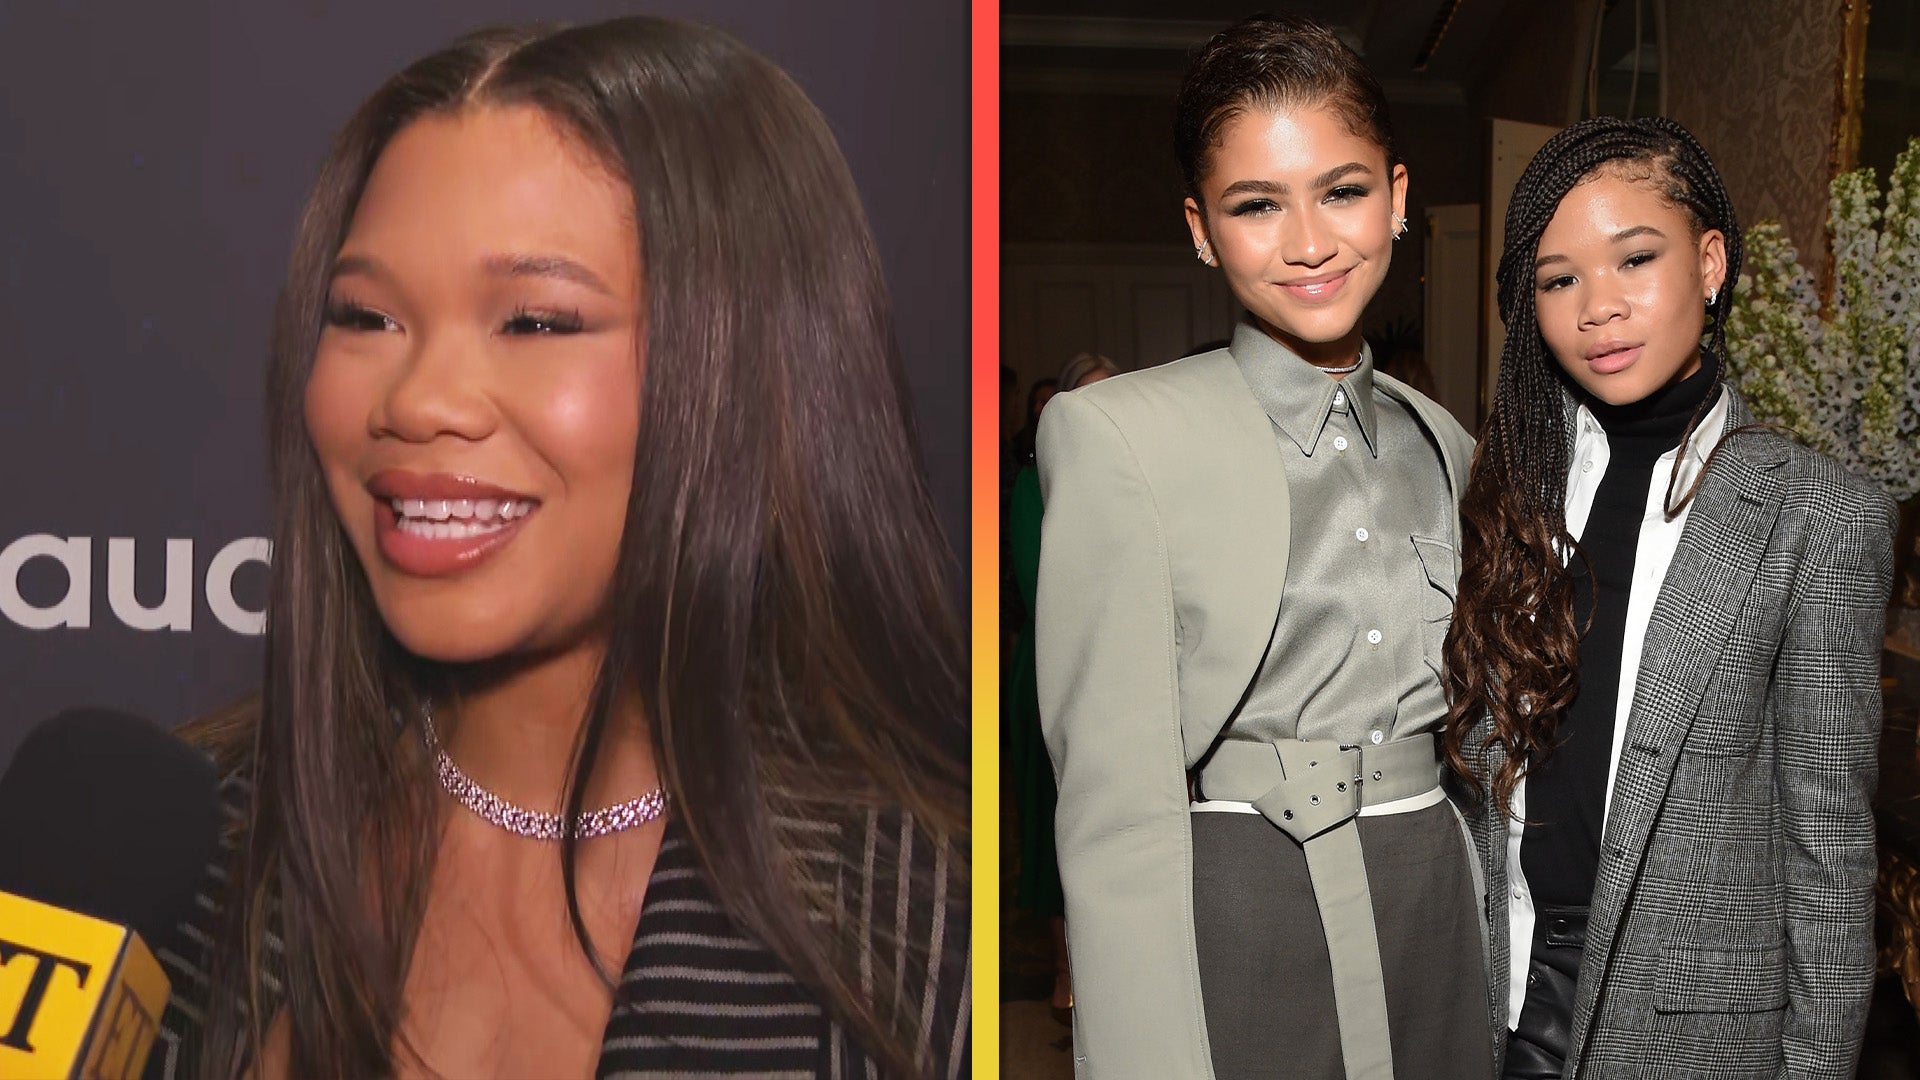 Storm Reid Says She 'Bows Down' to 'Style Icon' and 'Euphoria' Co-Star Zendaya (Exclusive)